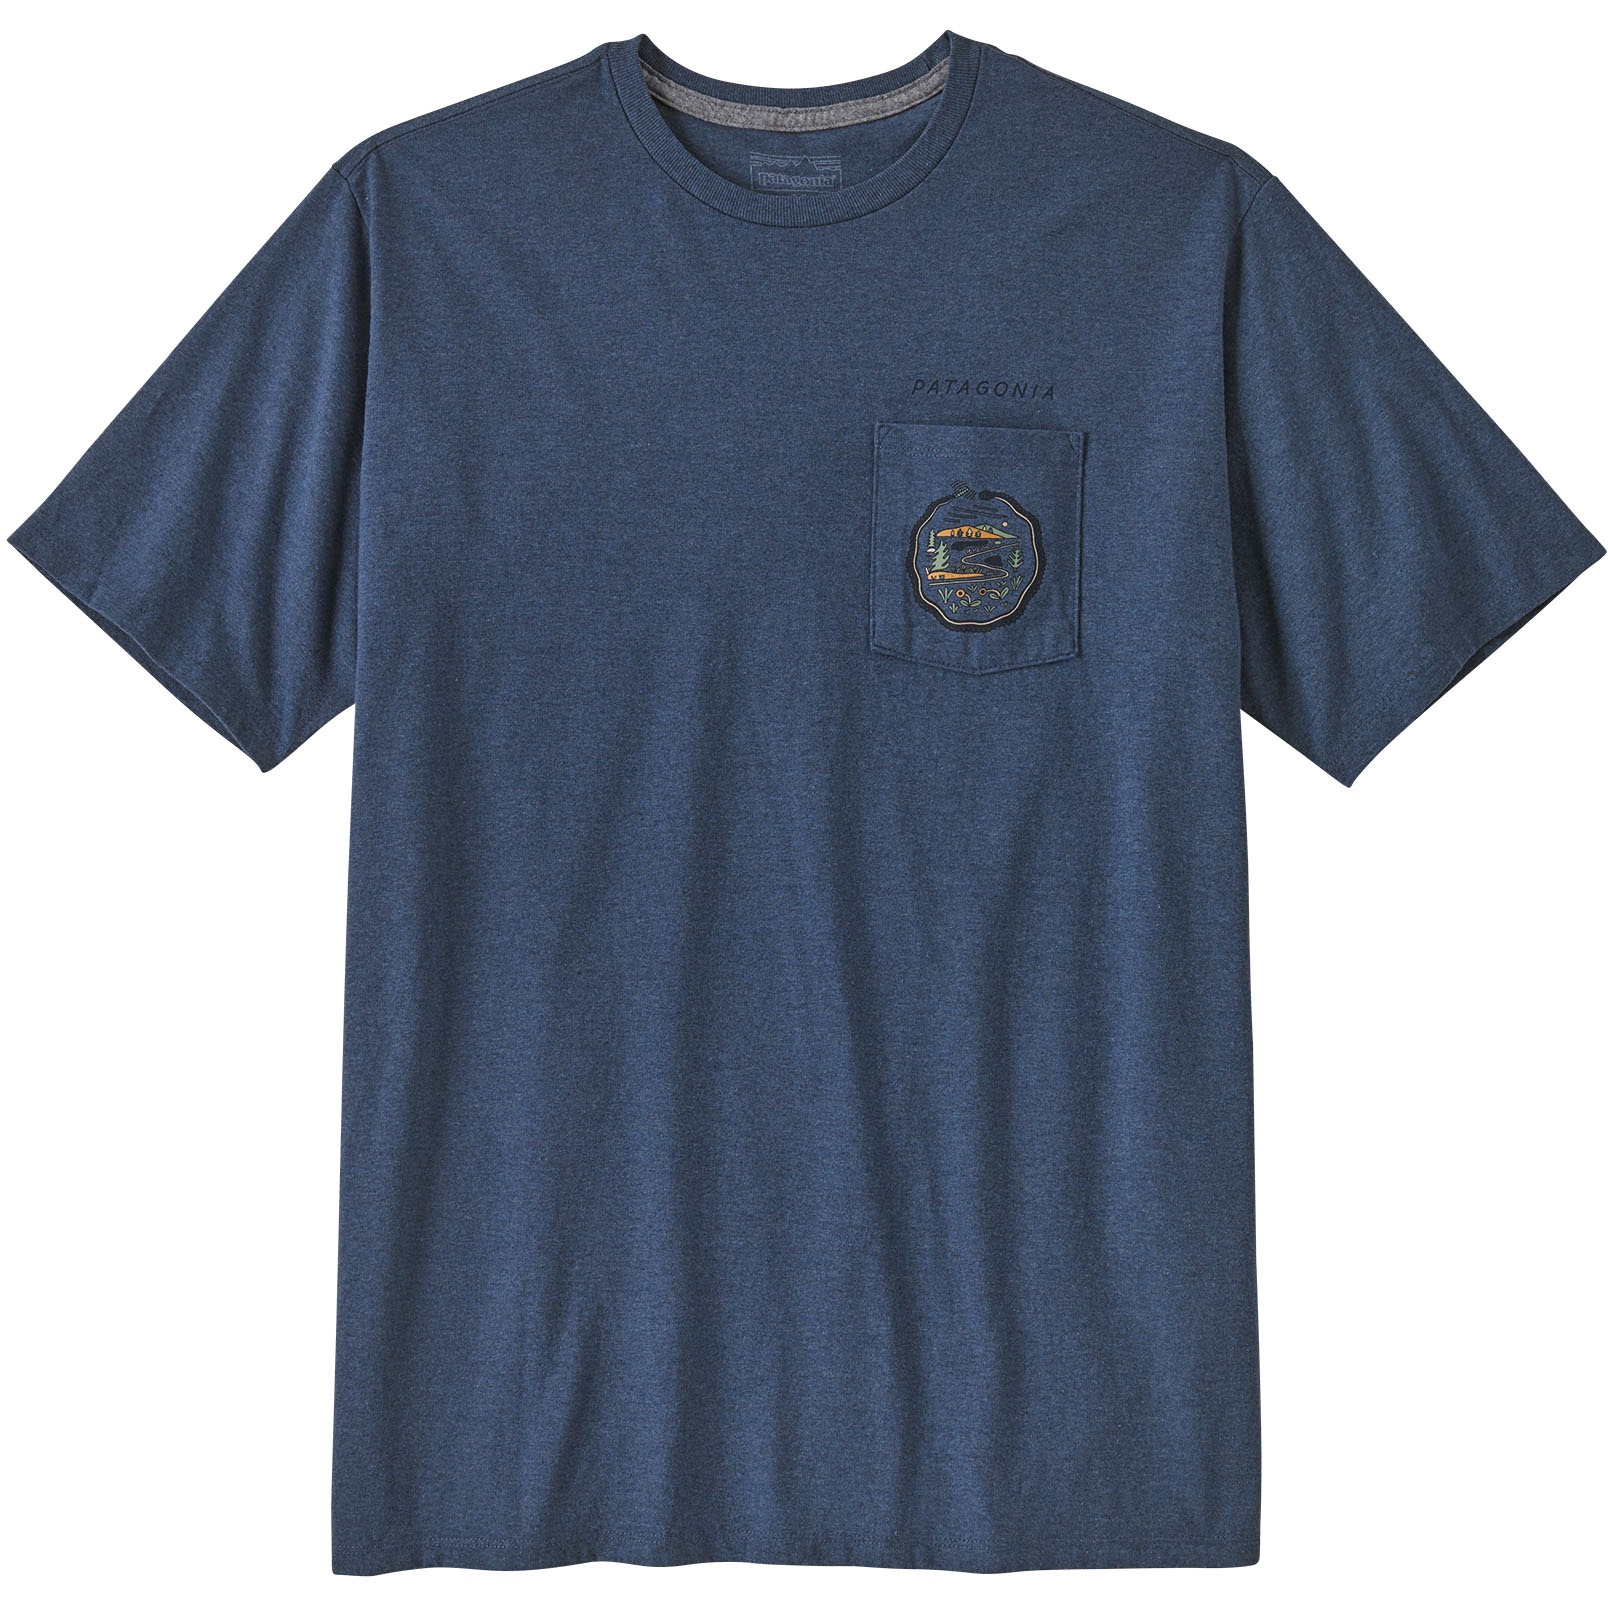 Picture of Patagonia Commontrail Pocket Responsibili-Tee Men - Utility Blue